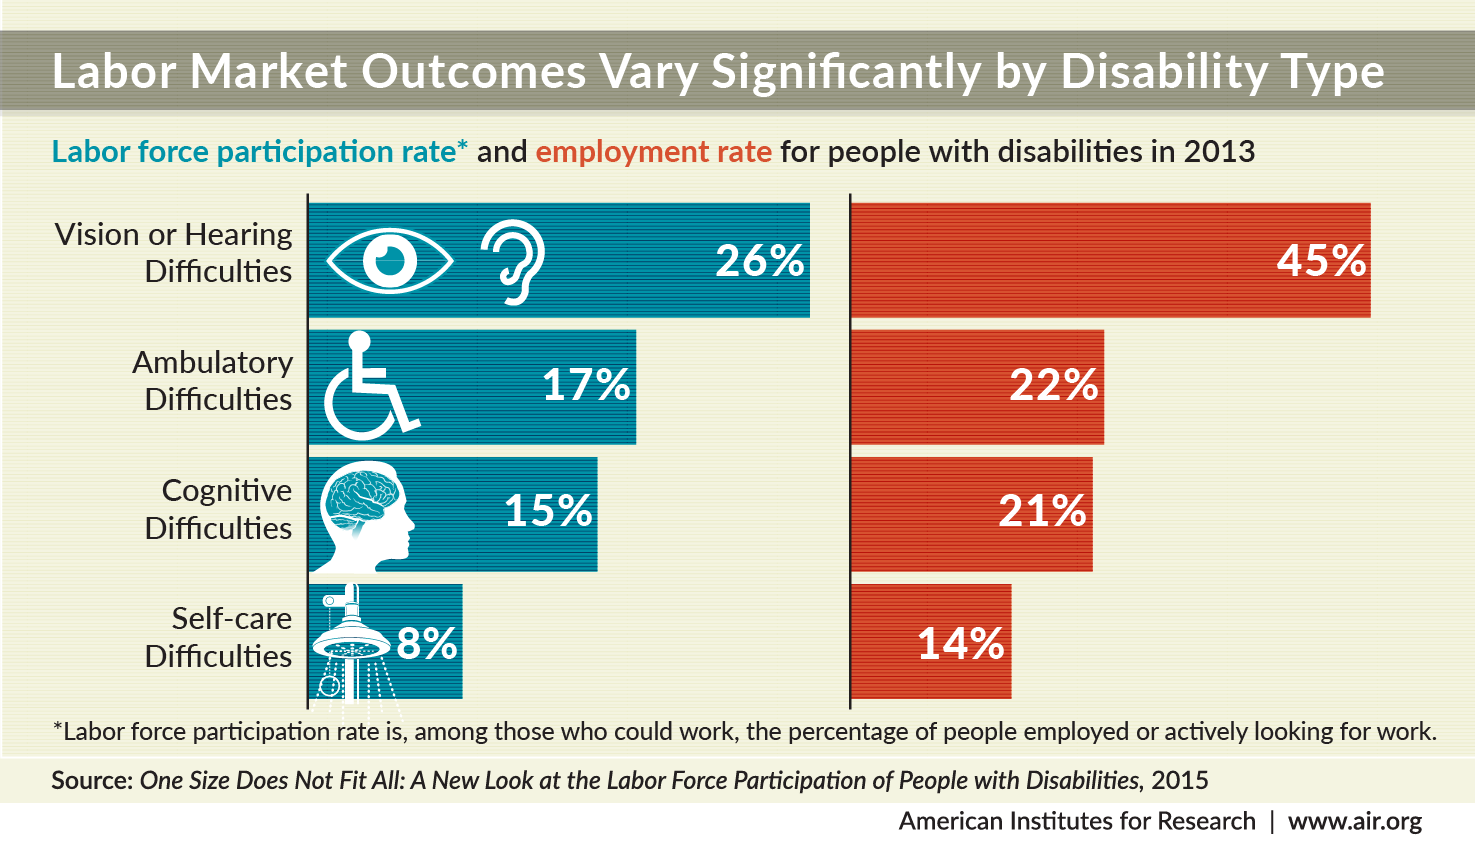 Bar chart 1: Labor Market Outcomes Vary Significantly by Disability Type. Labor force participation rate for people with disabilities 2013: 26% for those with vision or hearing difficulties; 17%  with ambulatory difficulties; 15% with cognitive difficulti